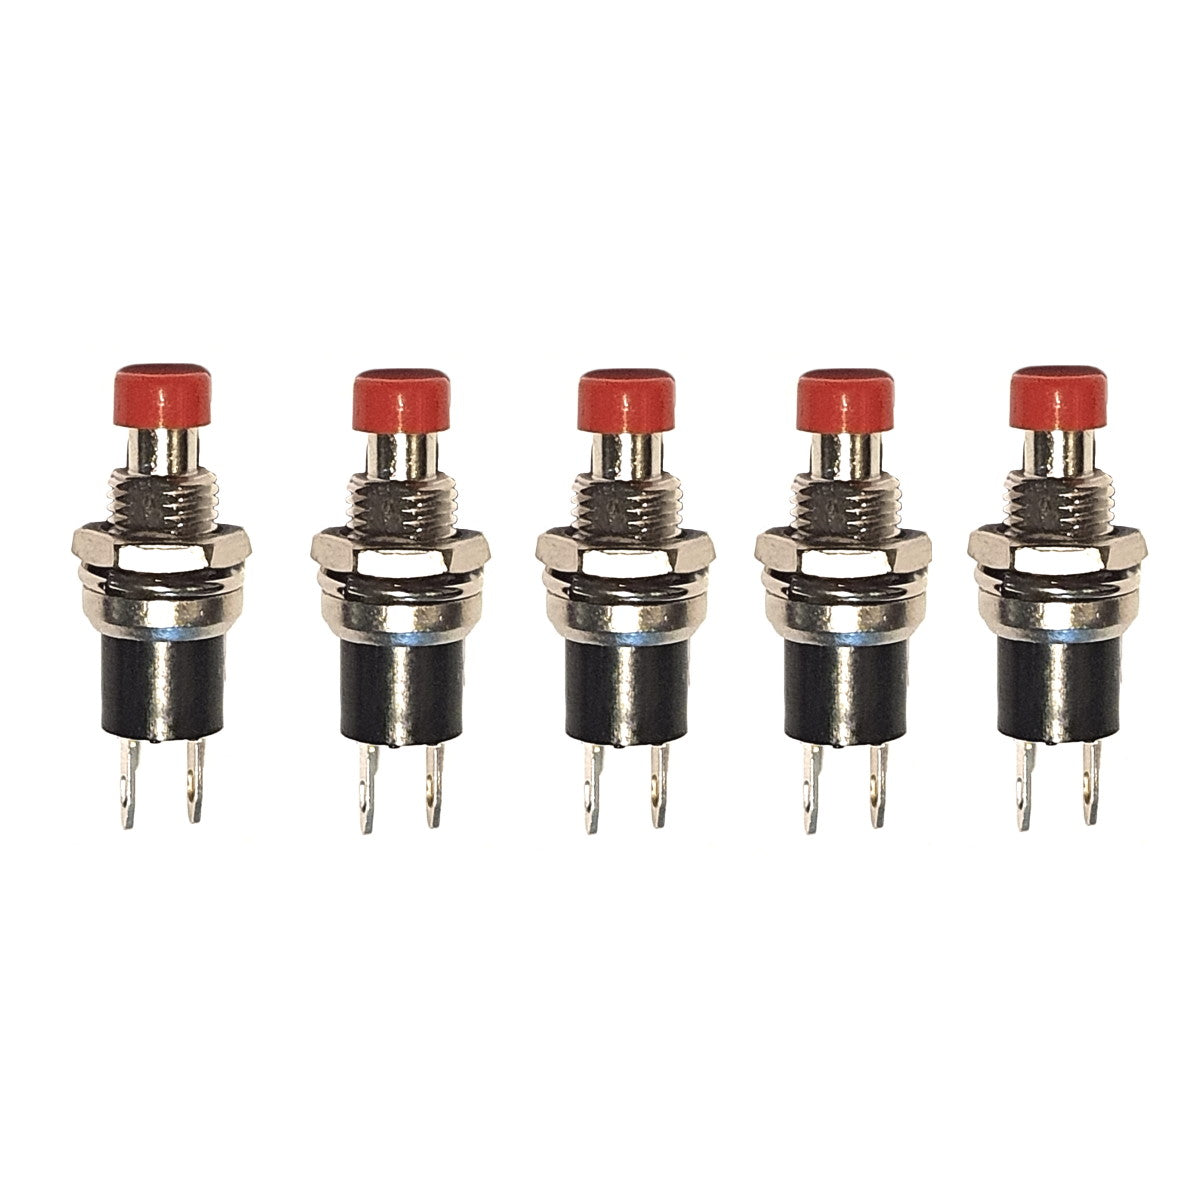 5 x Momentary Push Switch High Quality push to make circuit with red button 5pcs